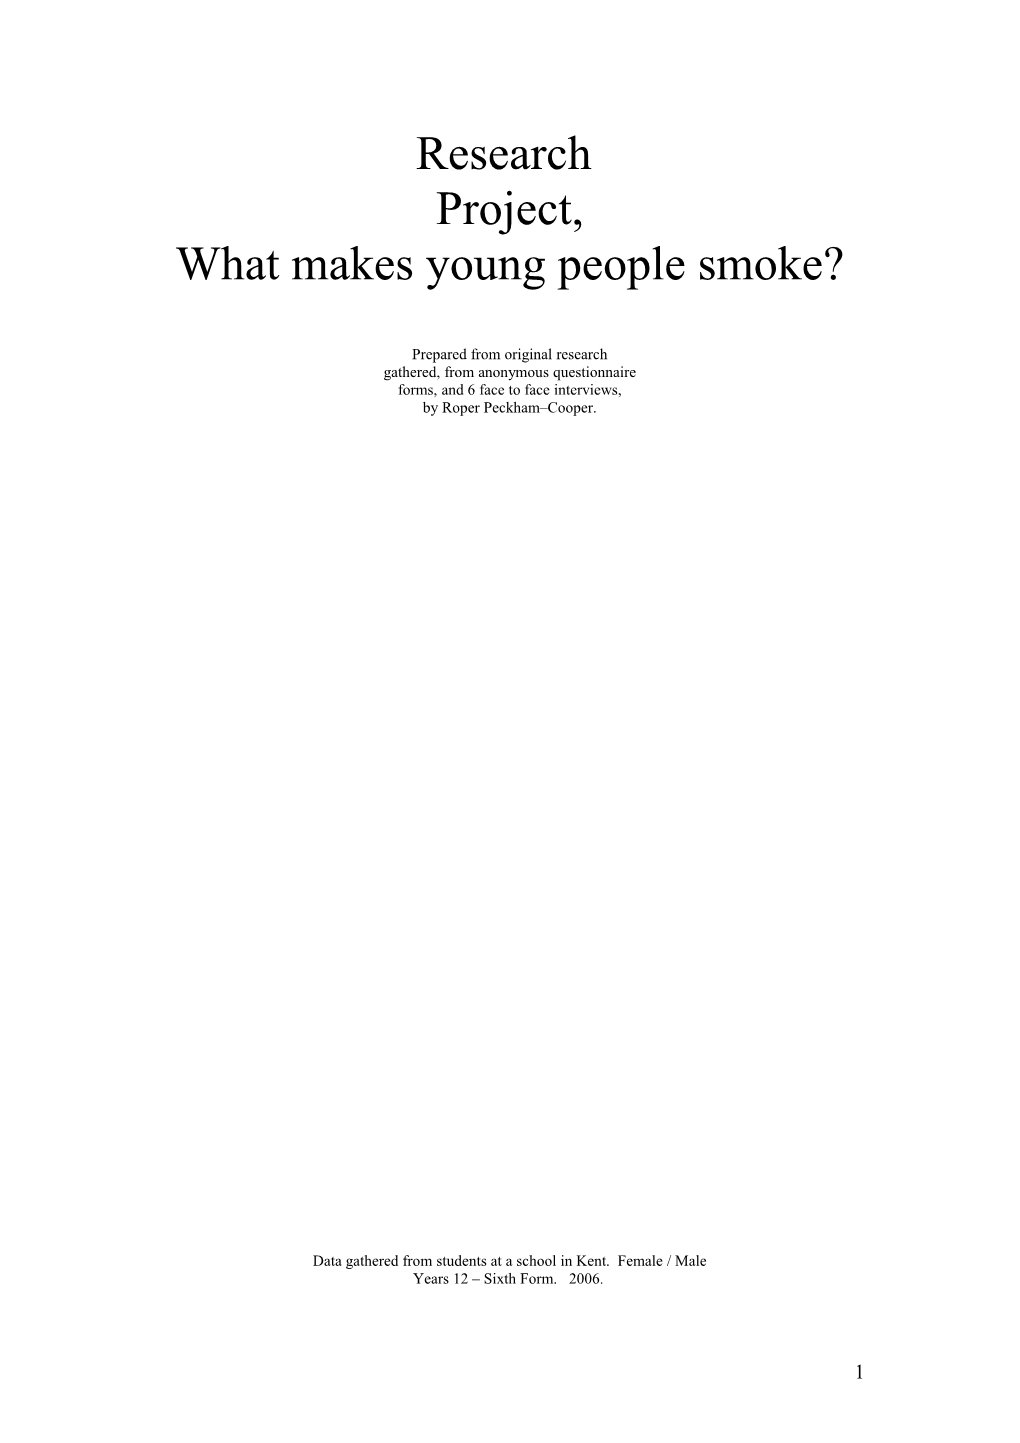 What Makes Young People Smoke?